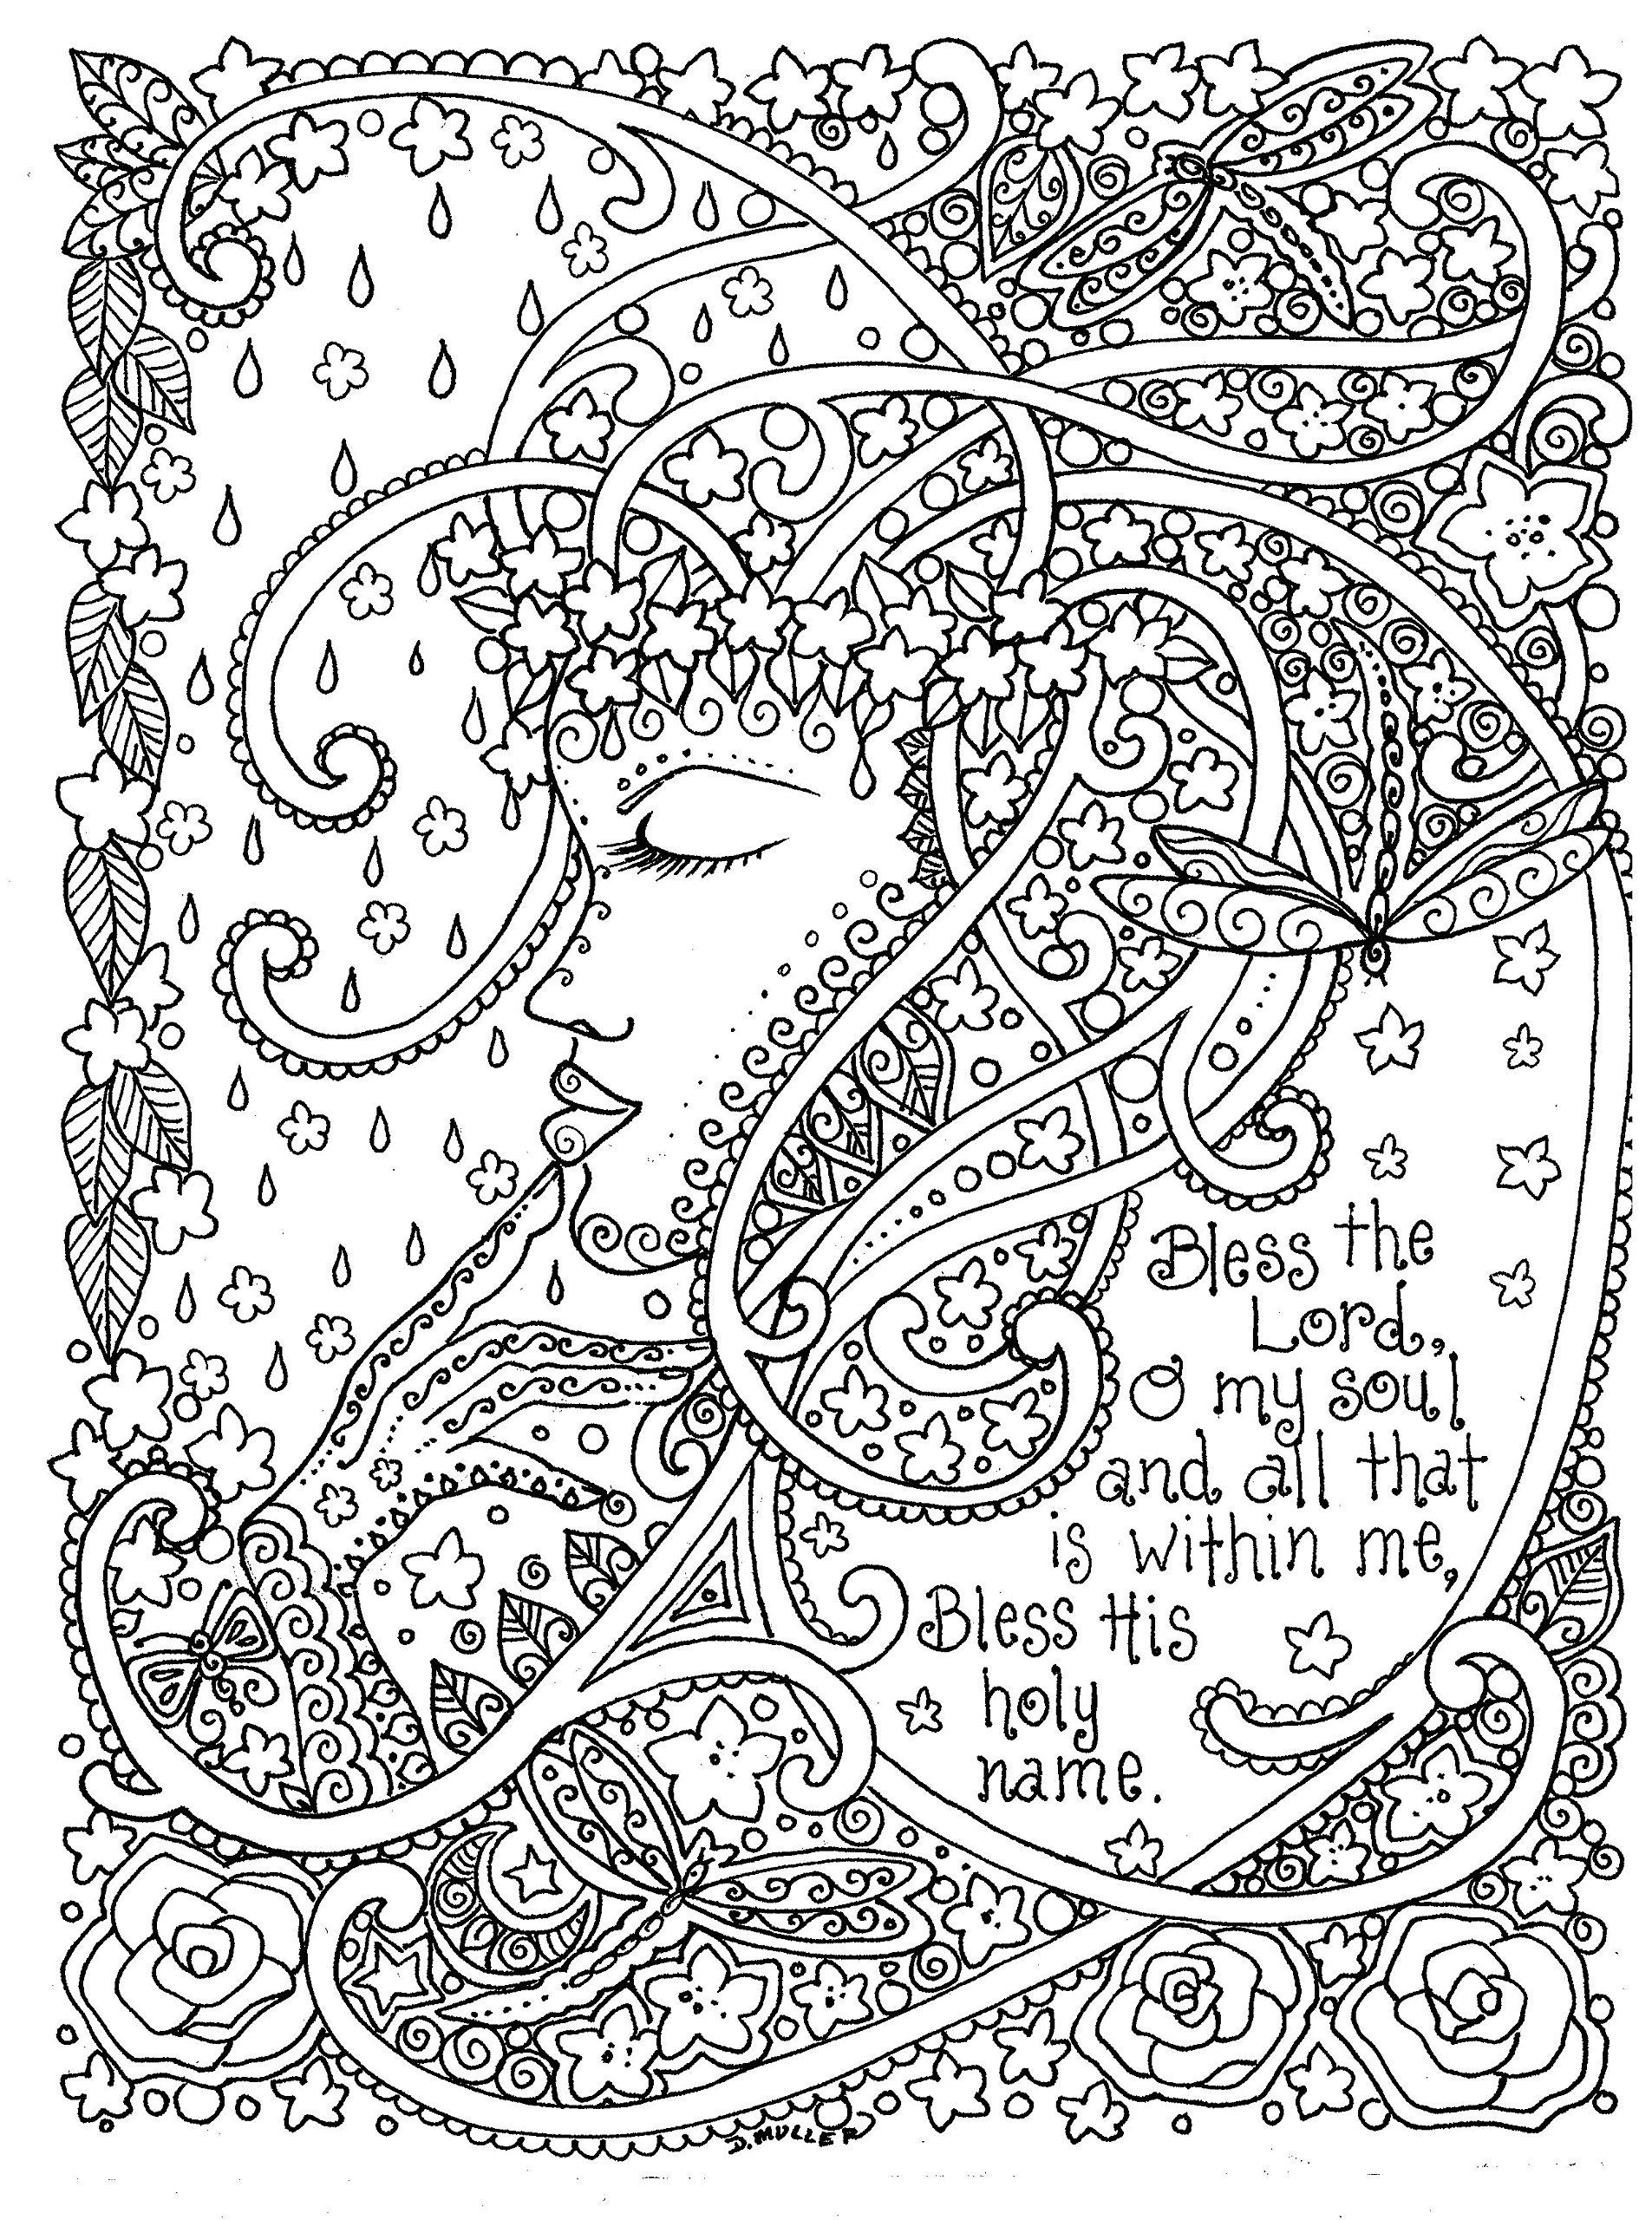 Prayer Coloring Pages For Adults
 Adult Coloring Prayers to Color By Deborah Muller